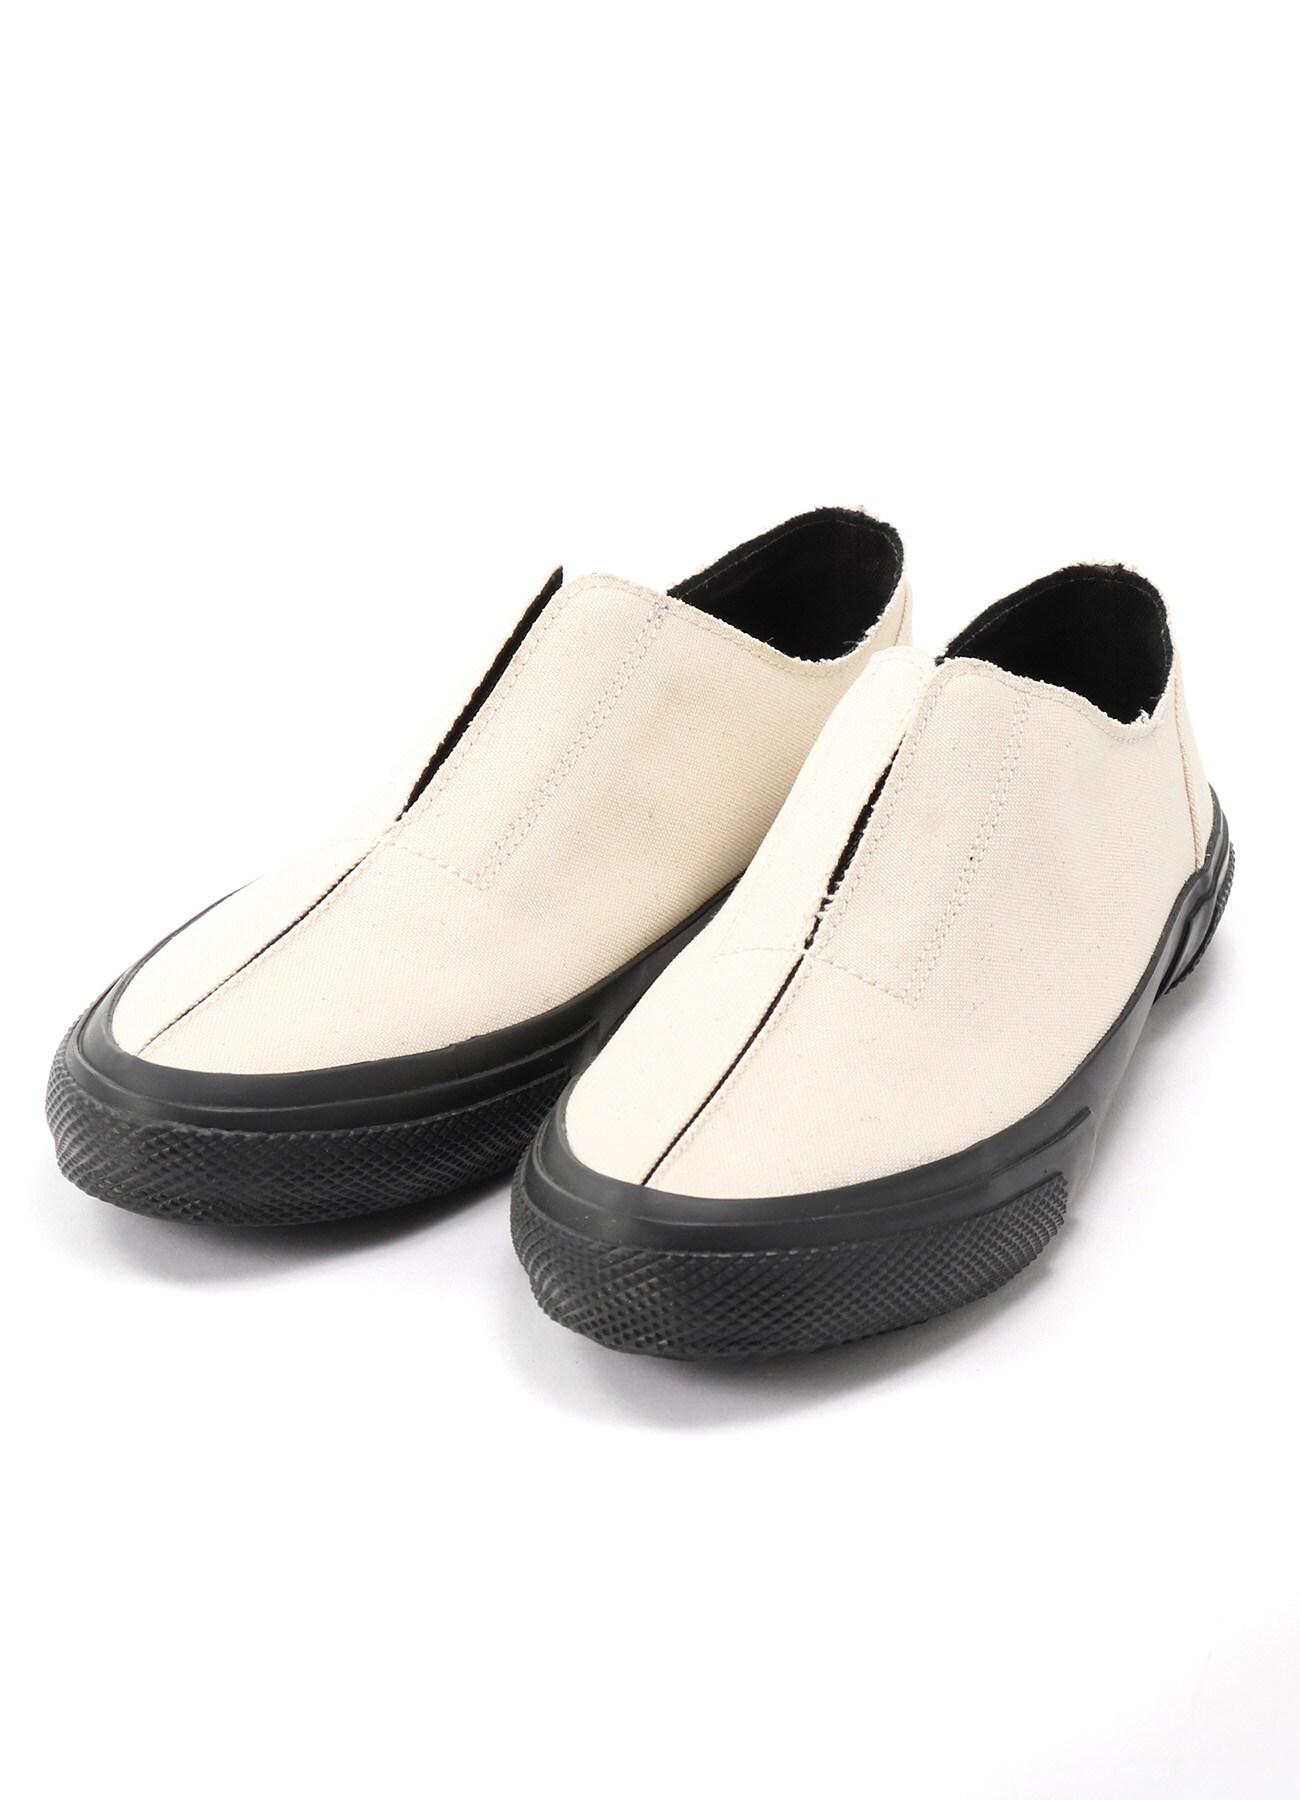 NO. 9 C/CANVAS GORE SLIP-ON SNEAKERS(25 